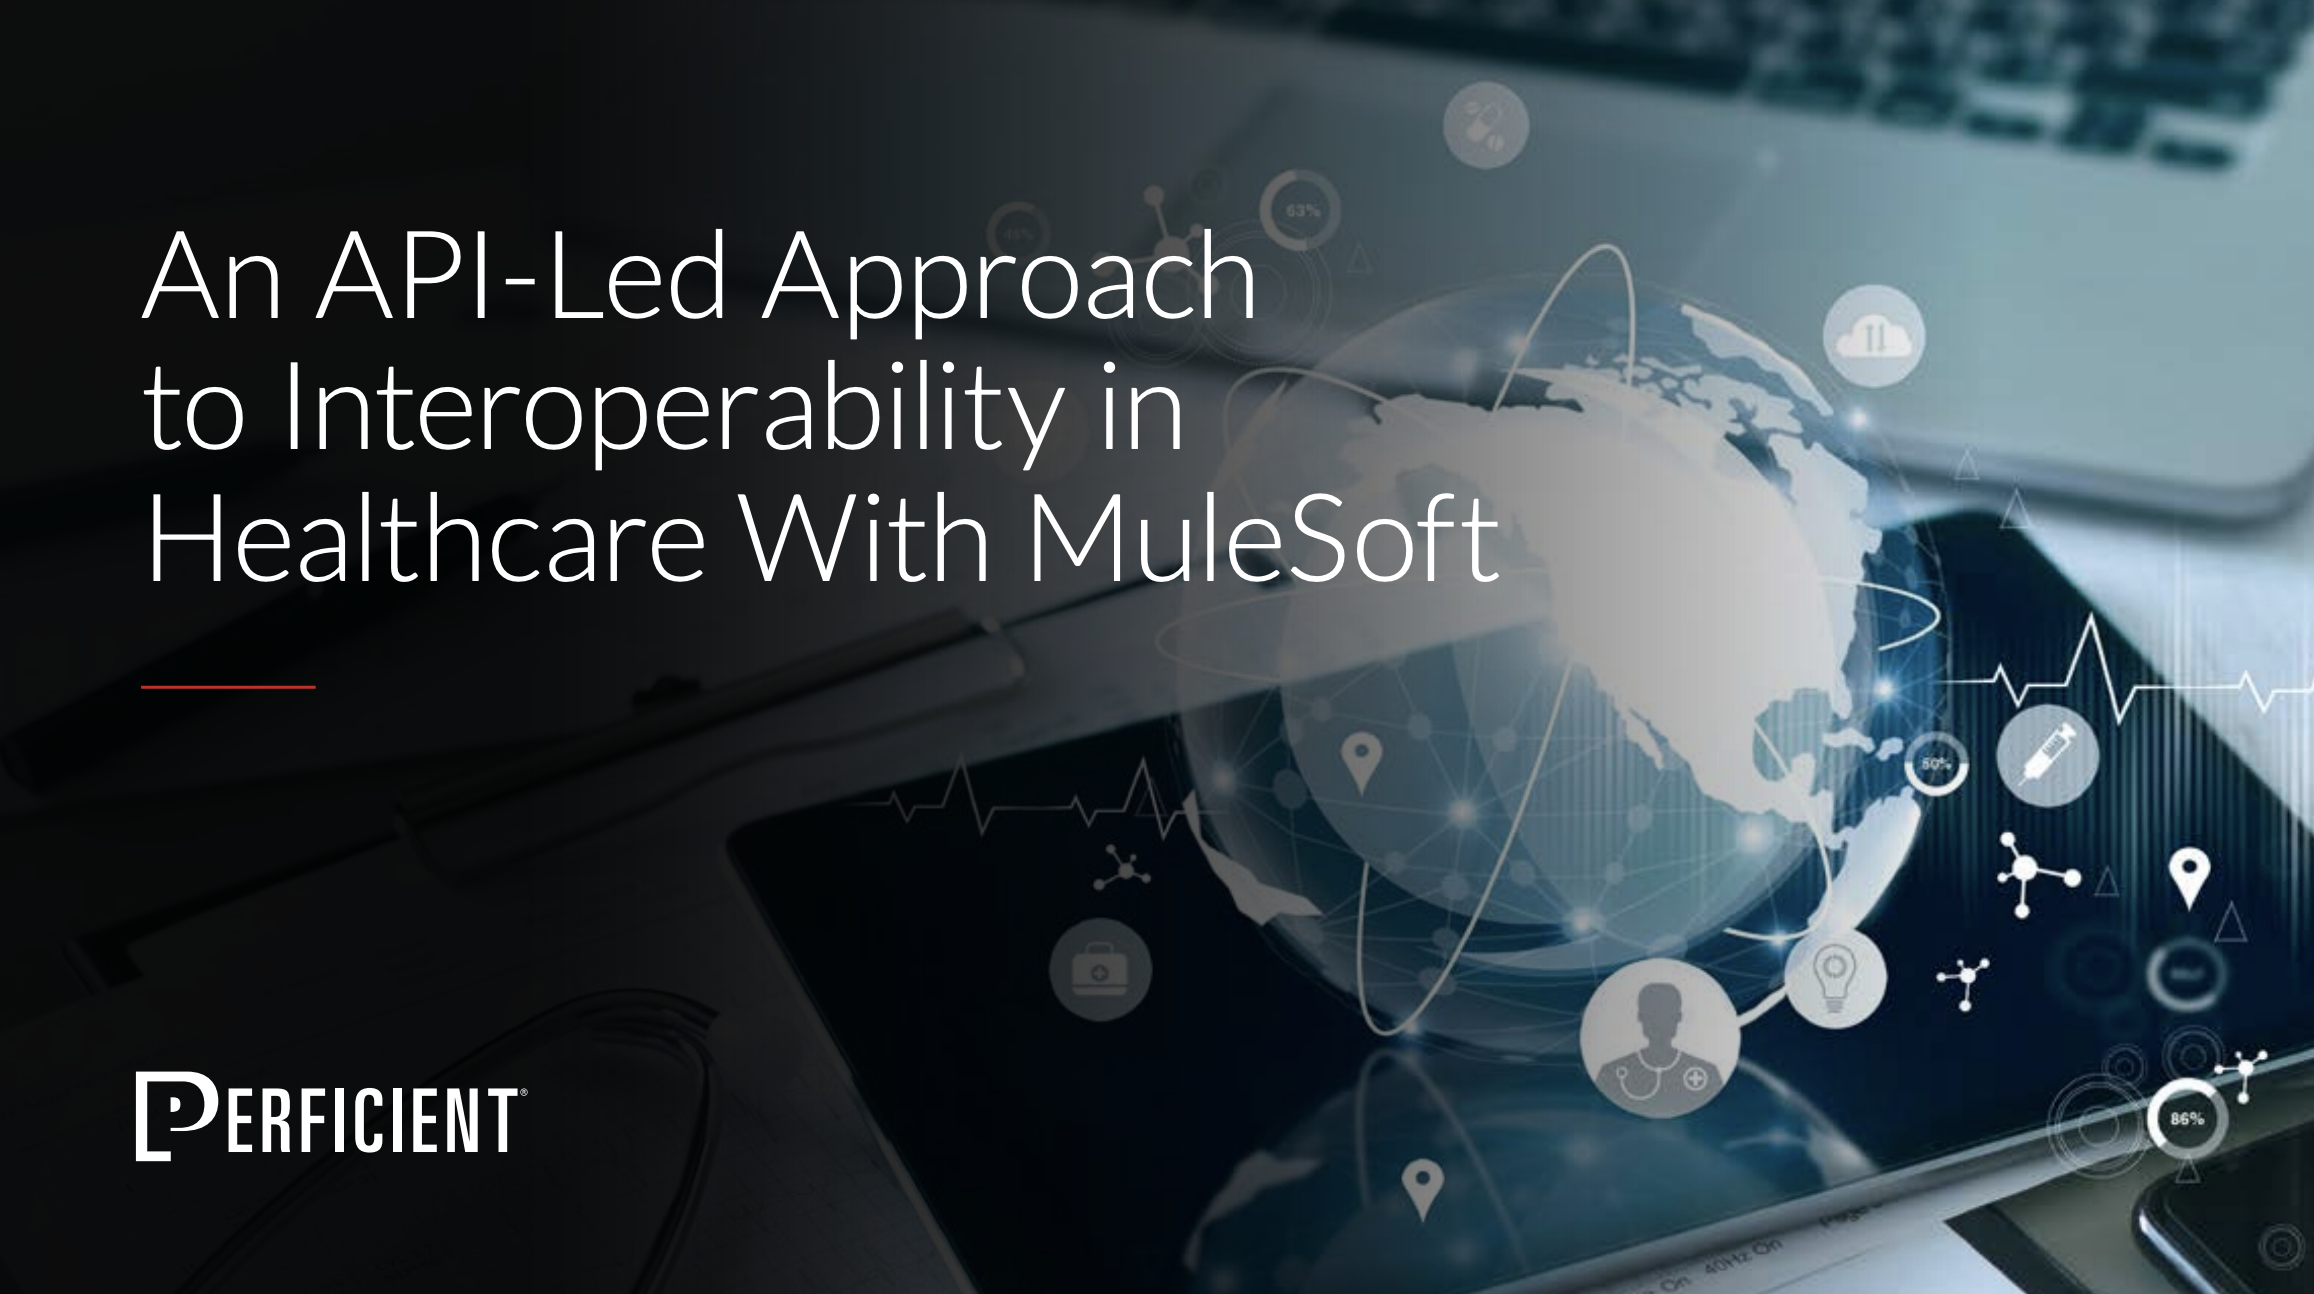 An API-Led Approach to Interoperability in Healthcare with MuleSoft